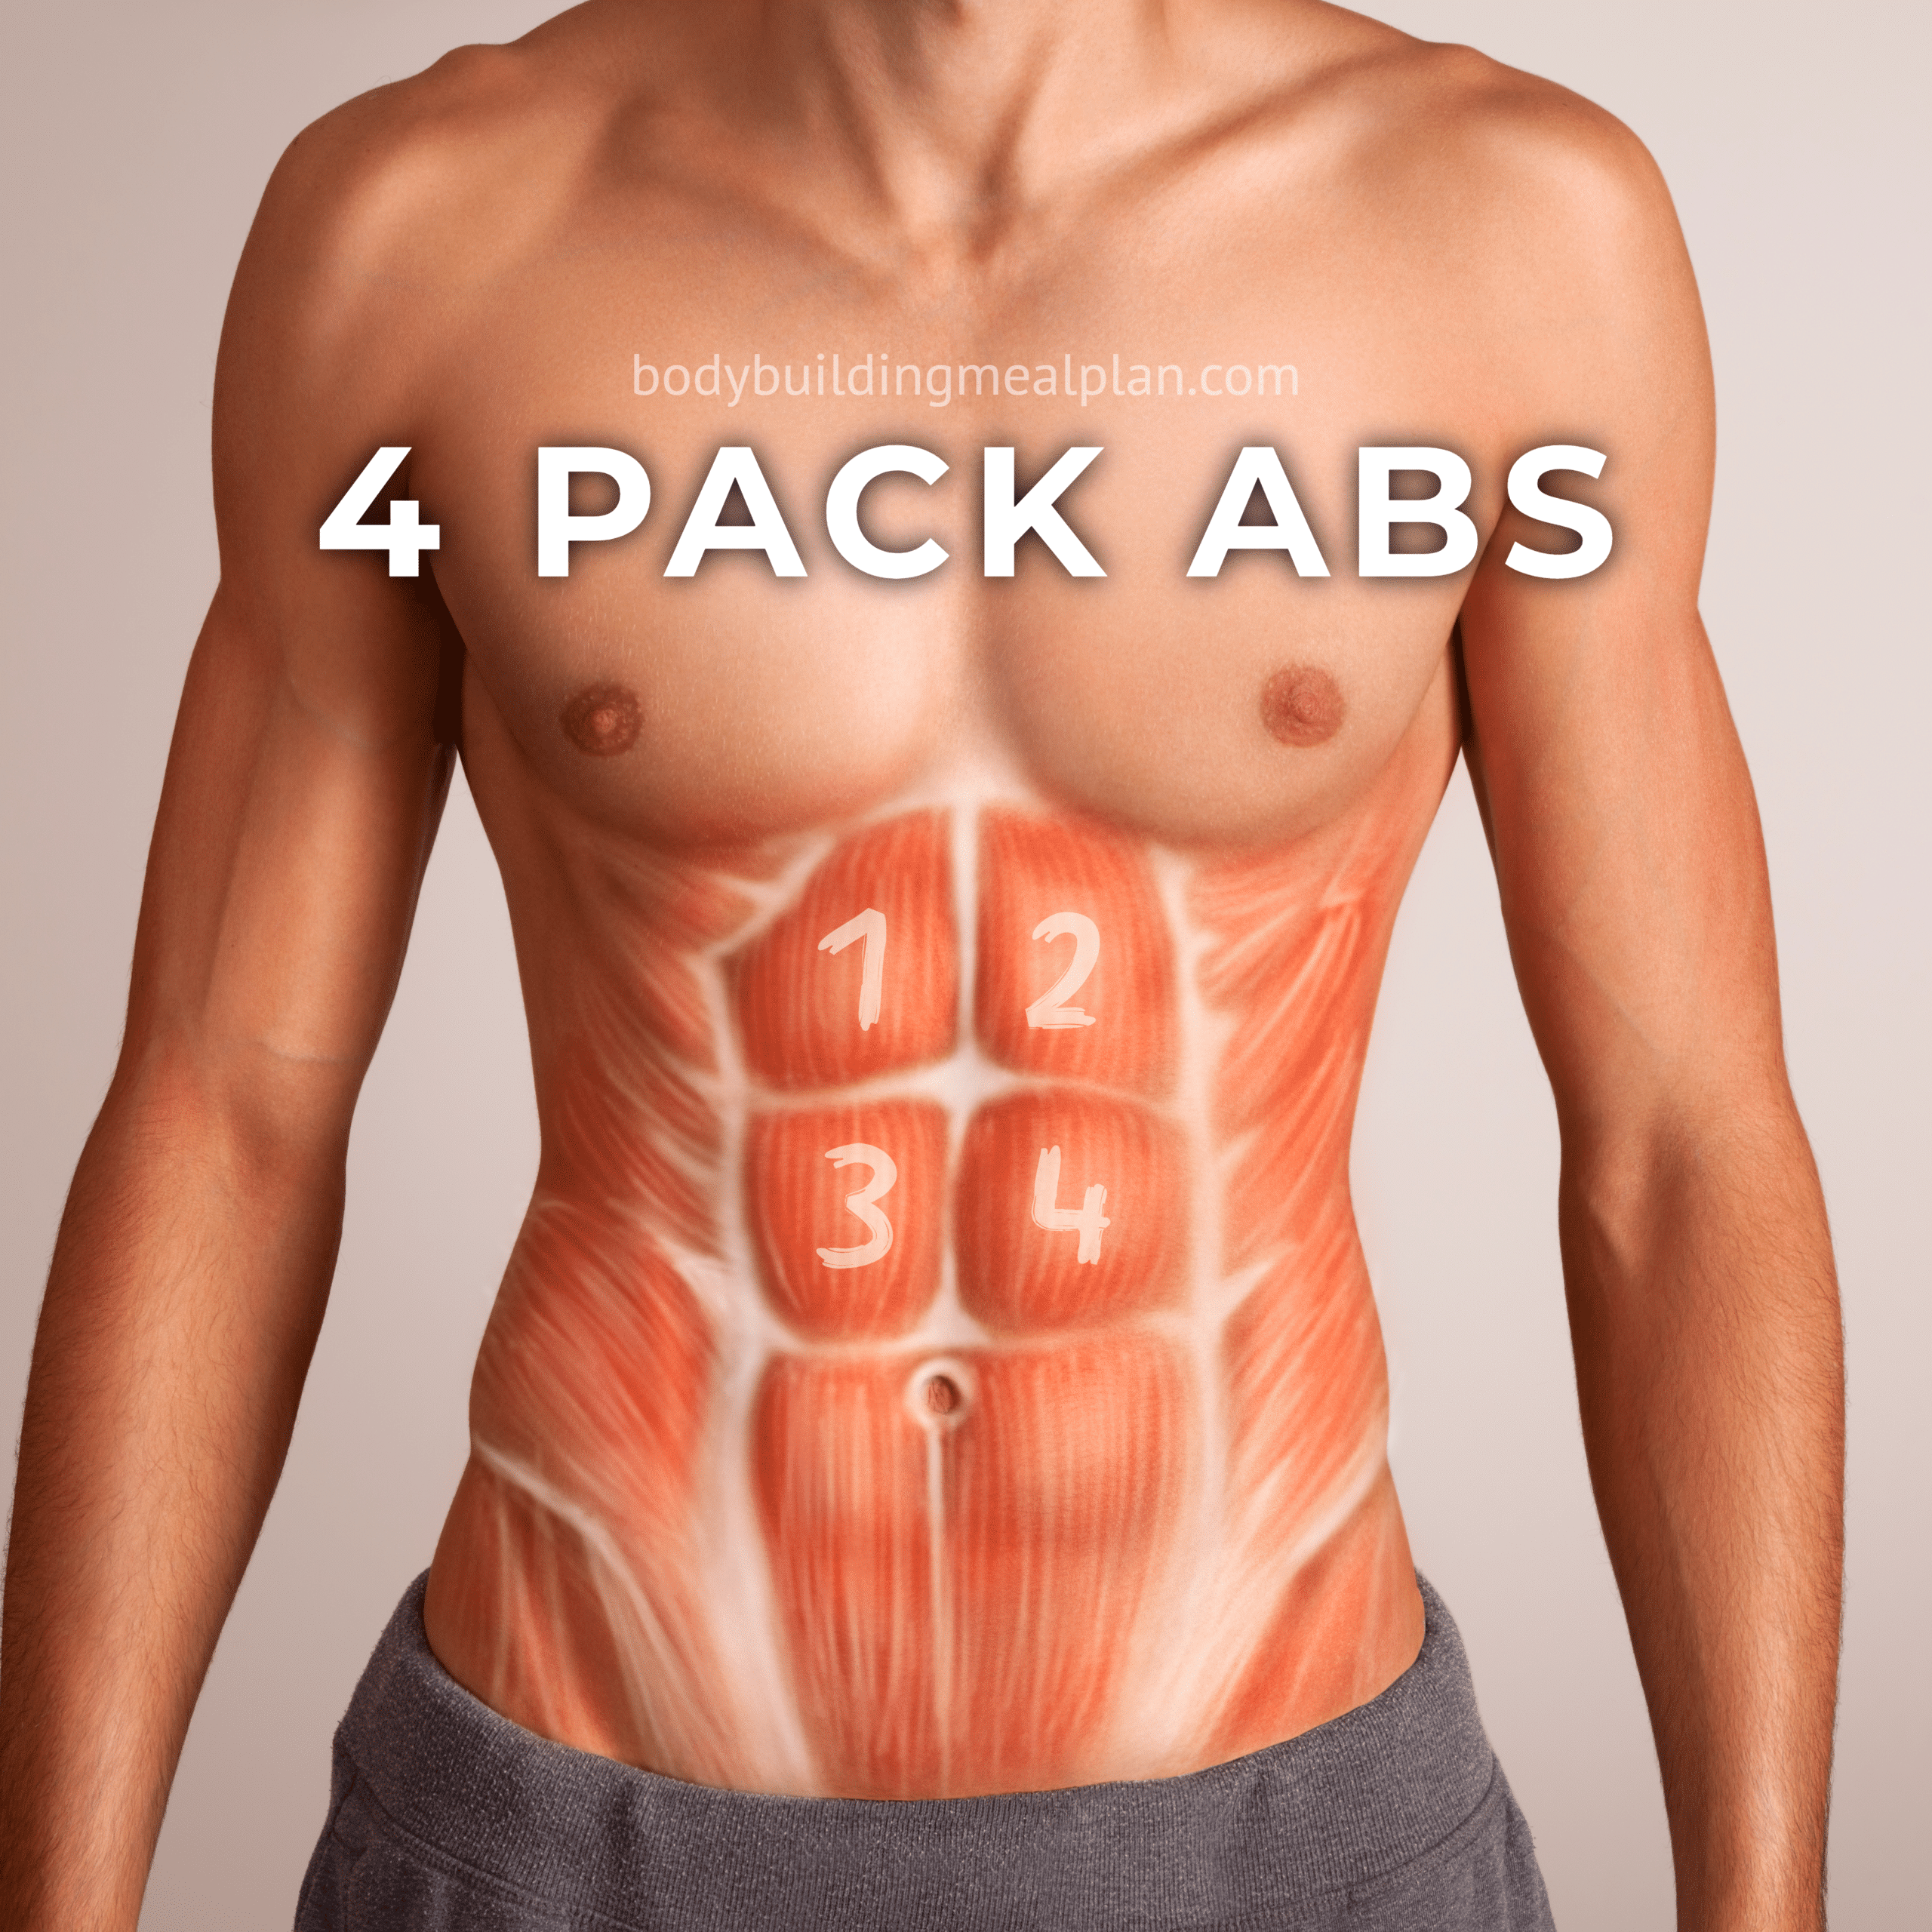 Why are only 6 packs popular when there are 4 packs, 8 packs, 12 packs,  etc.? - Quora